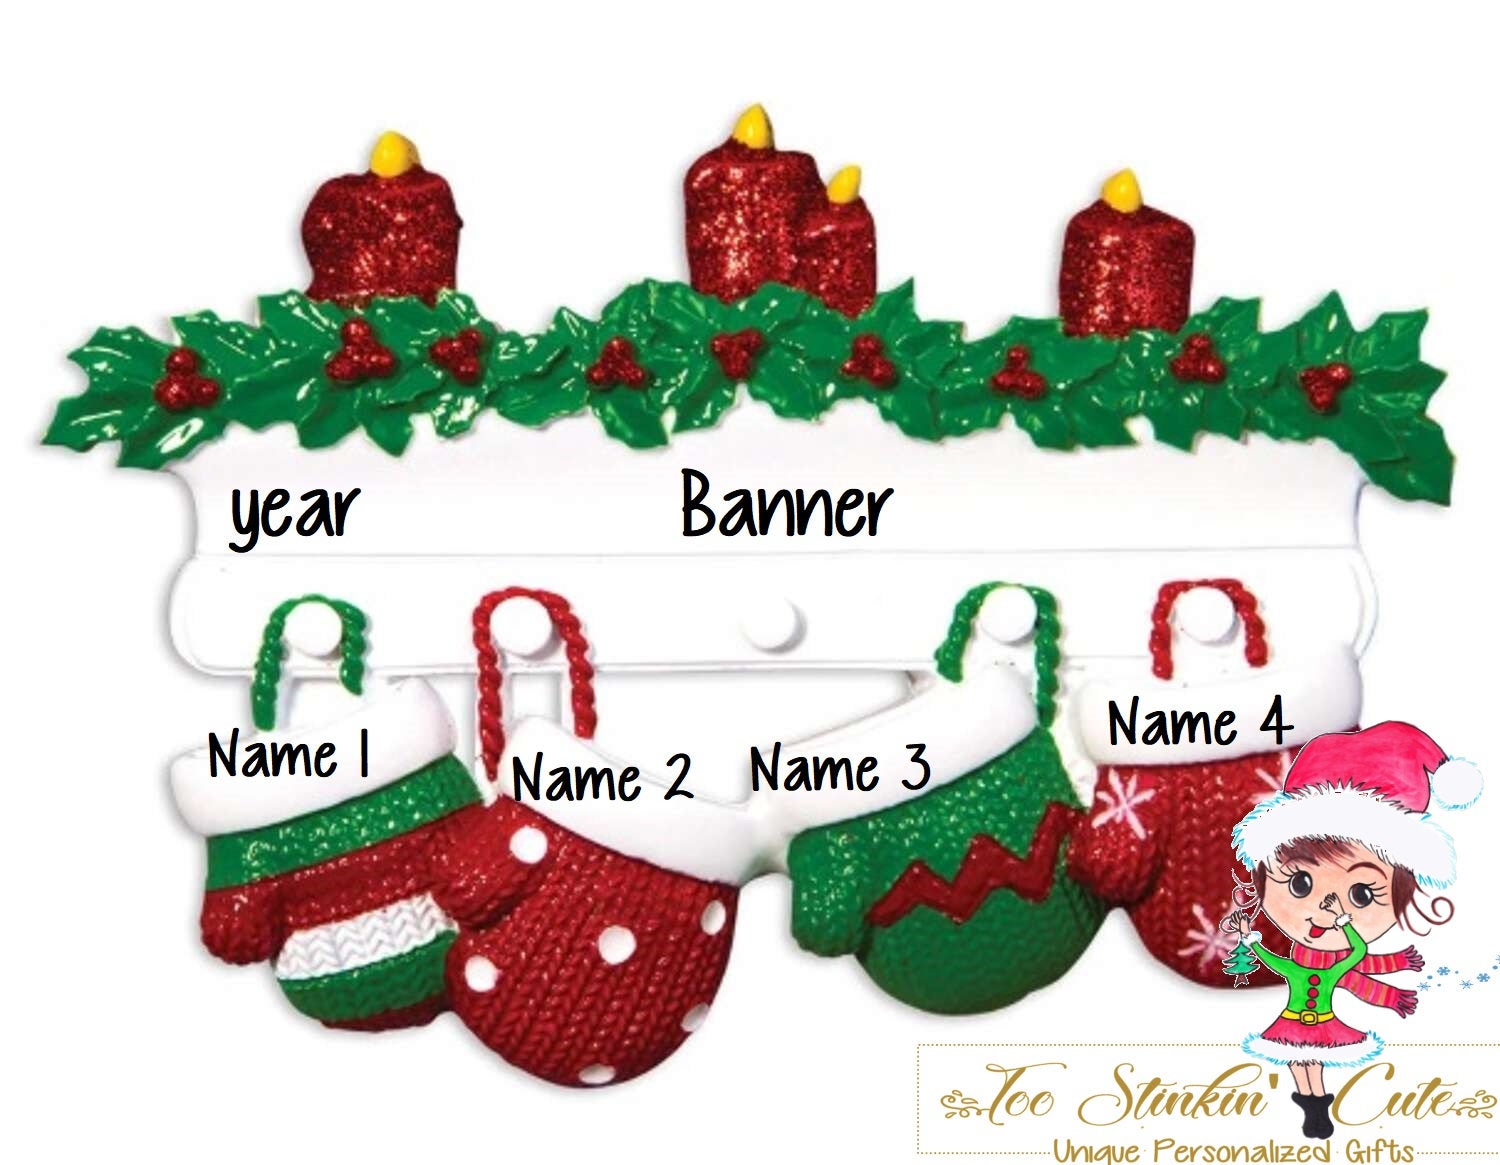 Personalized Christmas Ornament Mittens Family of 4 + Free Shipping!